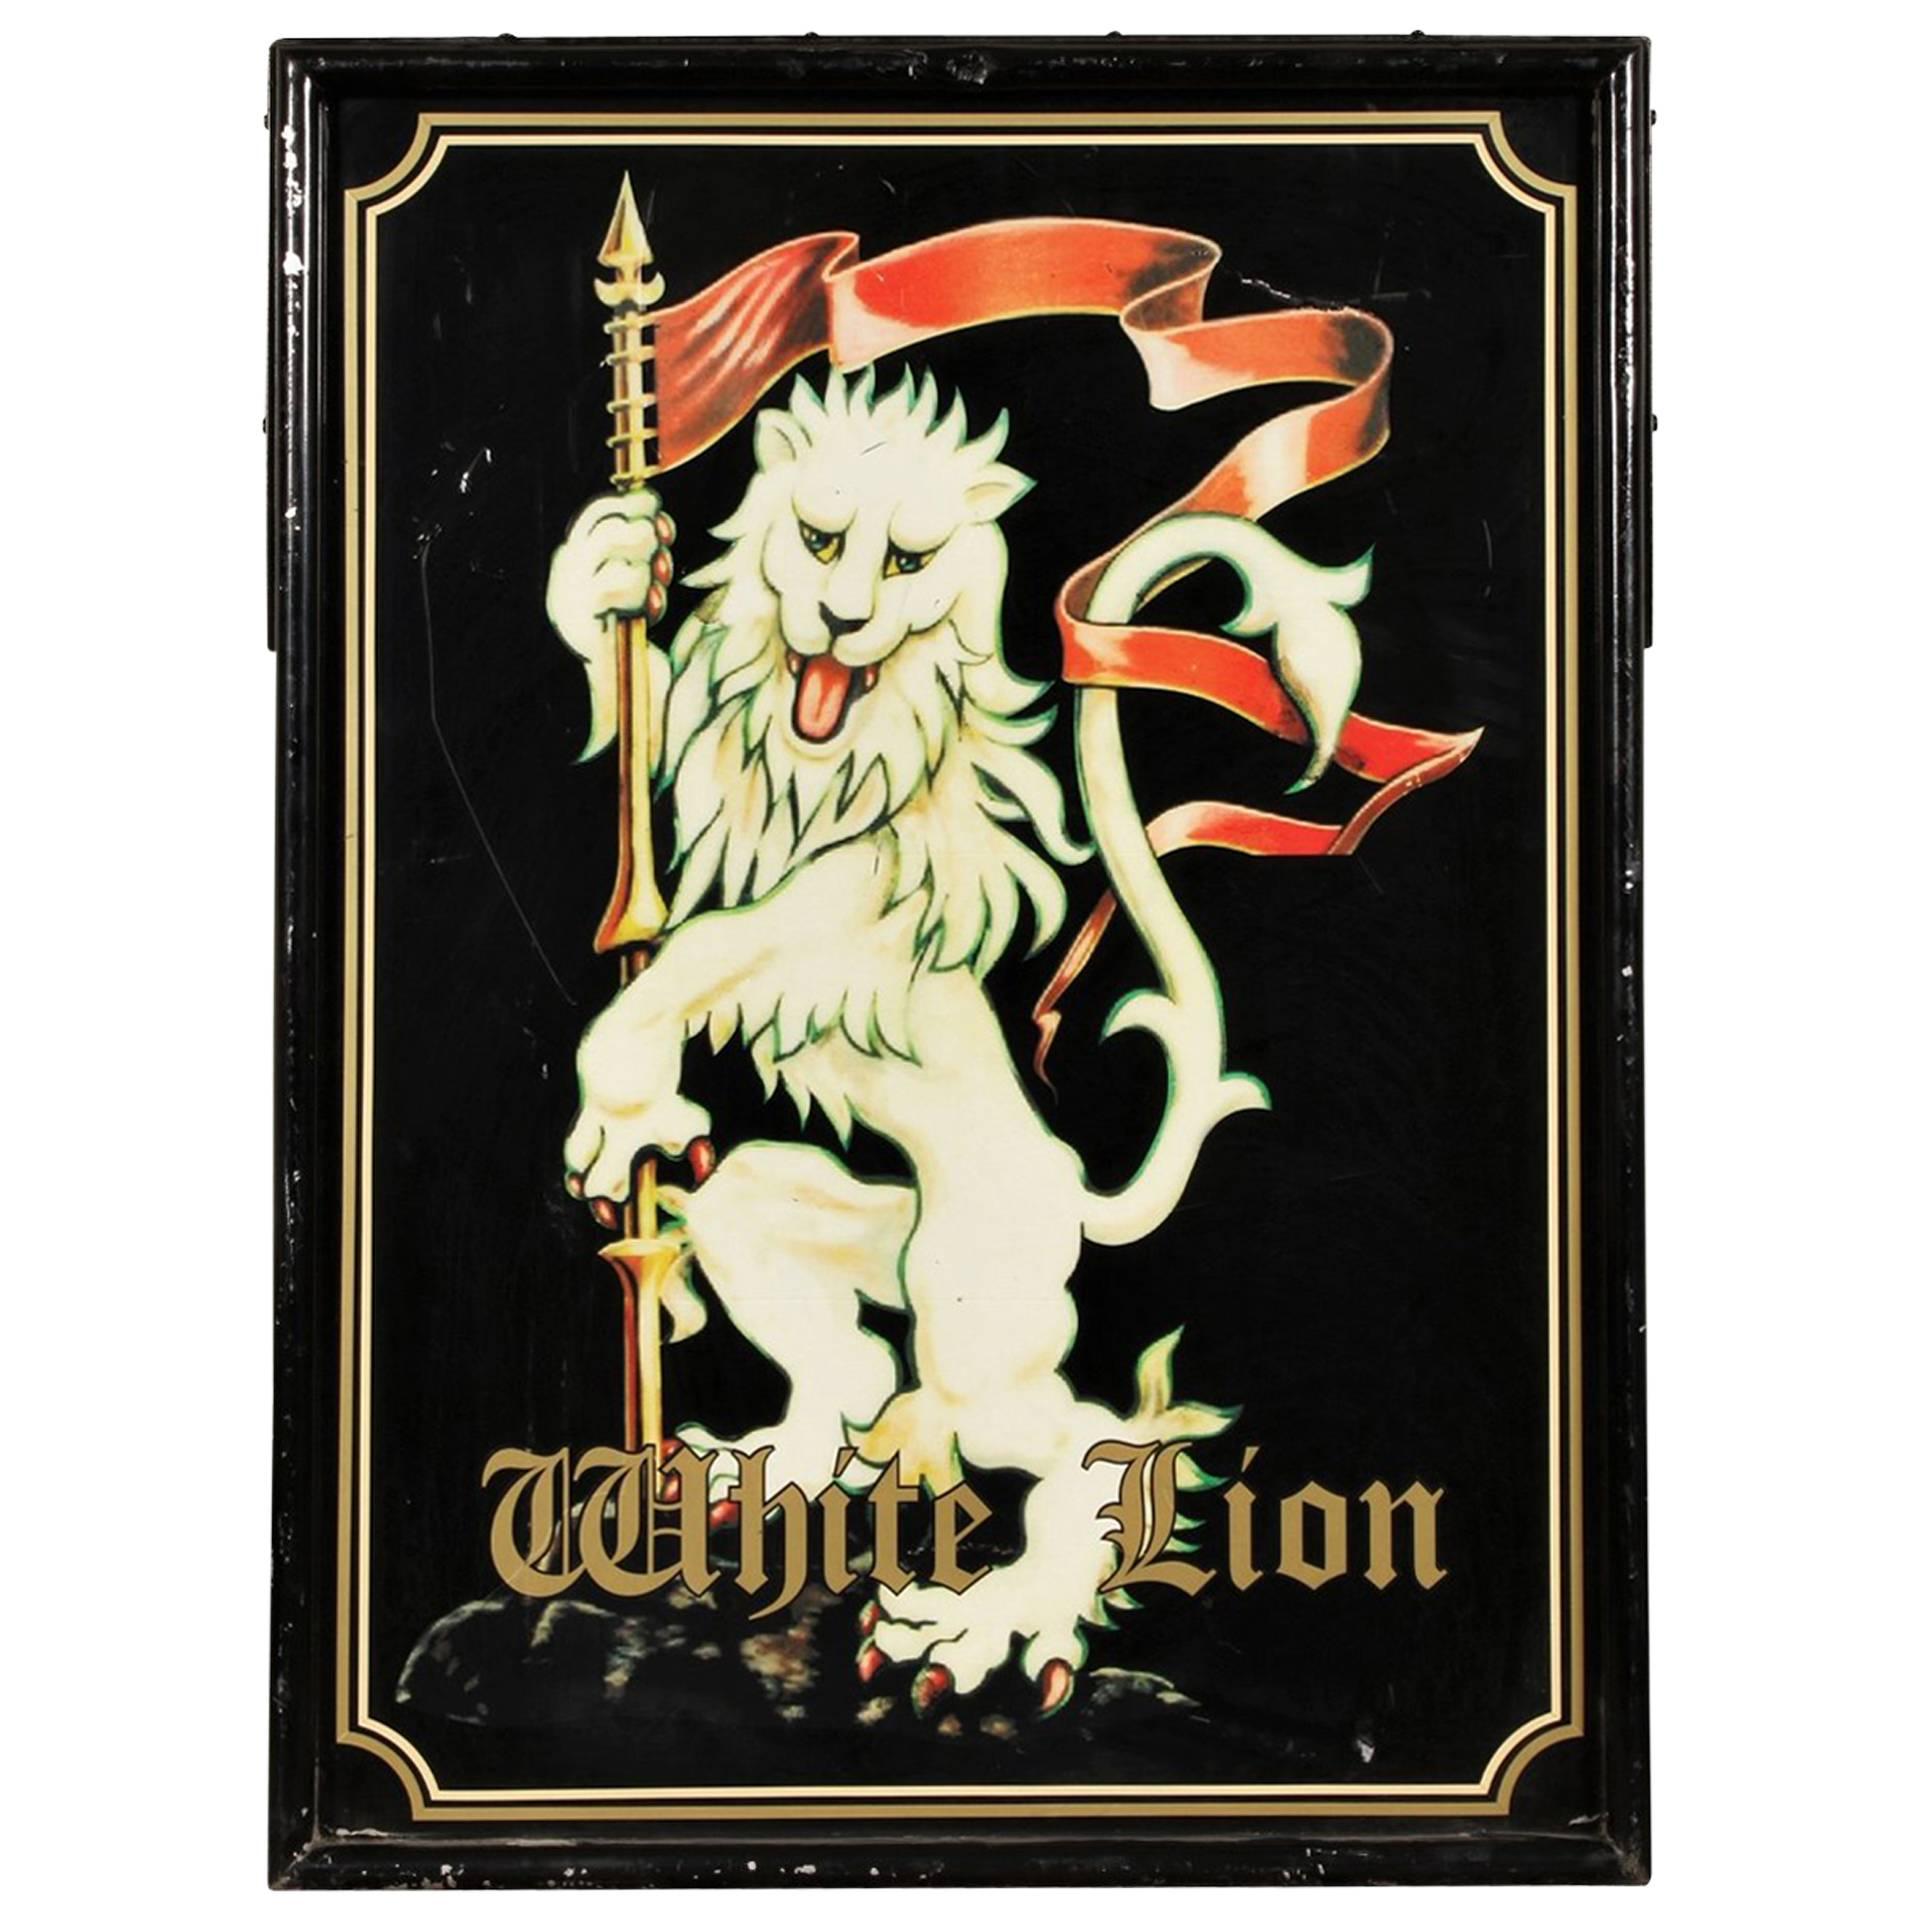 White Lion Metal Outdoor Sign